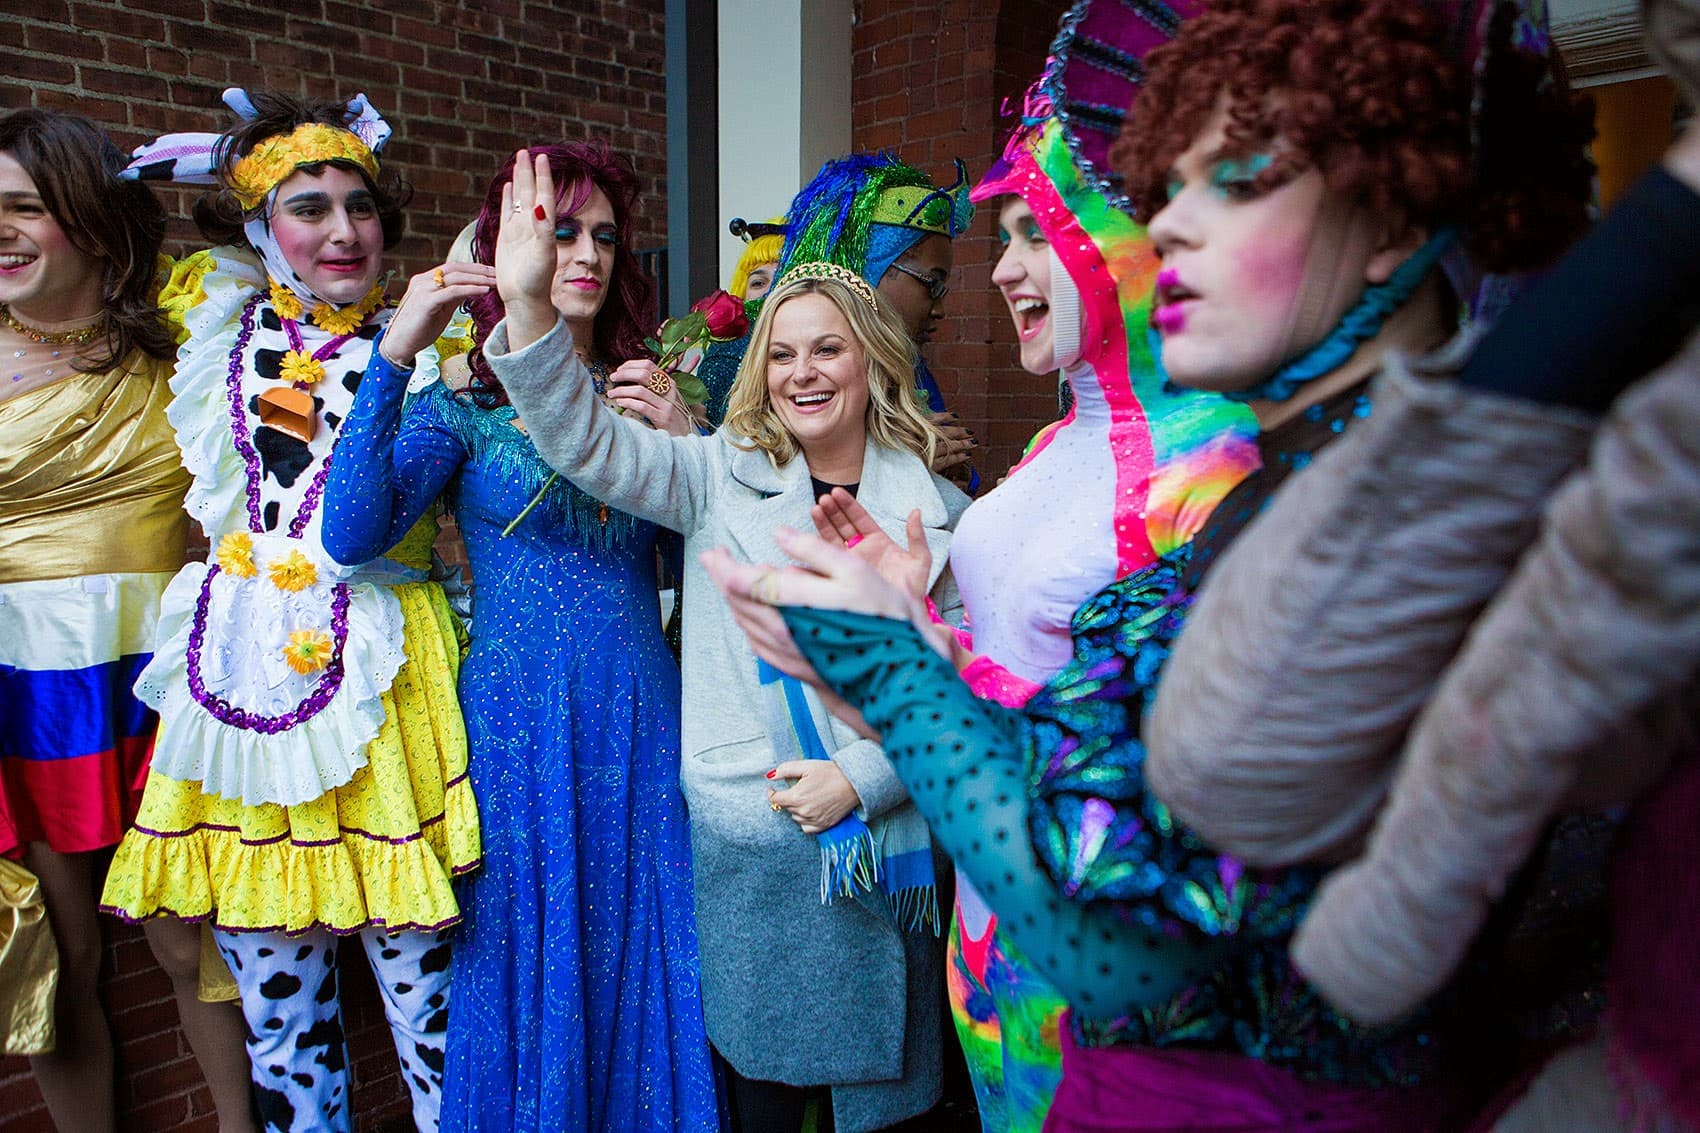 The men of Hasty Pudding dressed in drag stand with Amy Poehler, their 2014 Woman of the Year honoree. (Jesse Costa/WBUR)